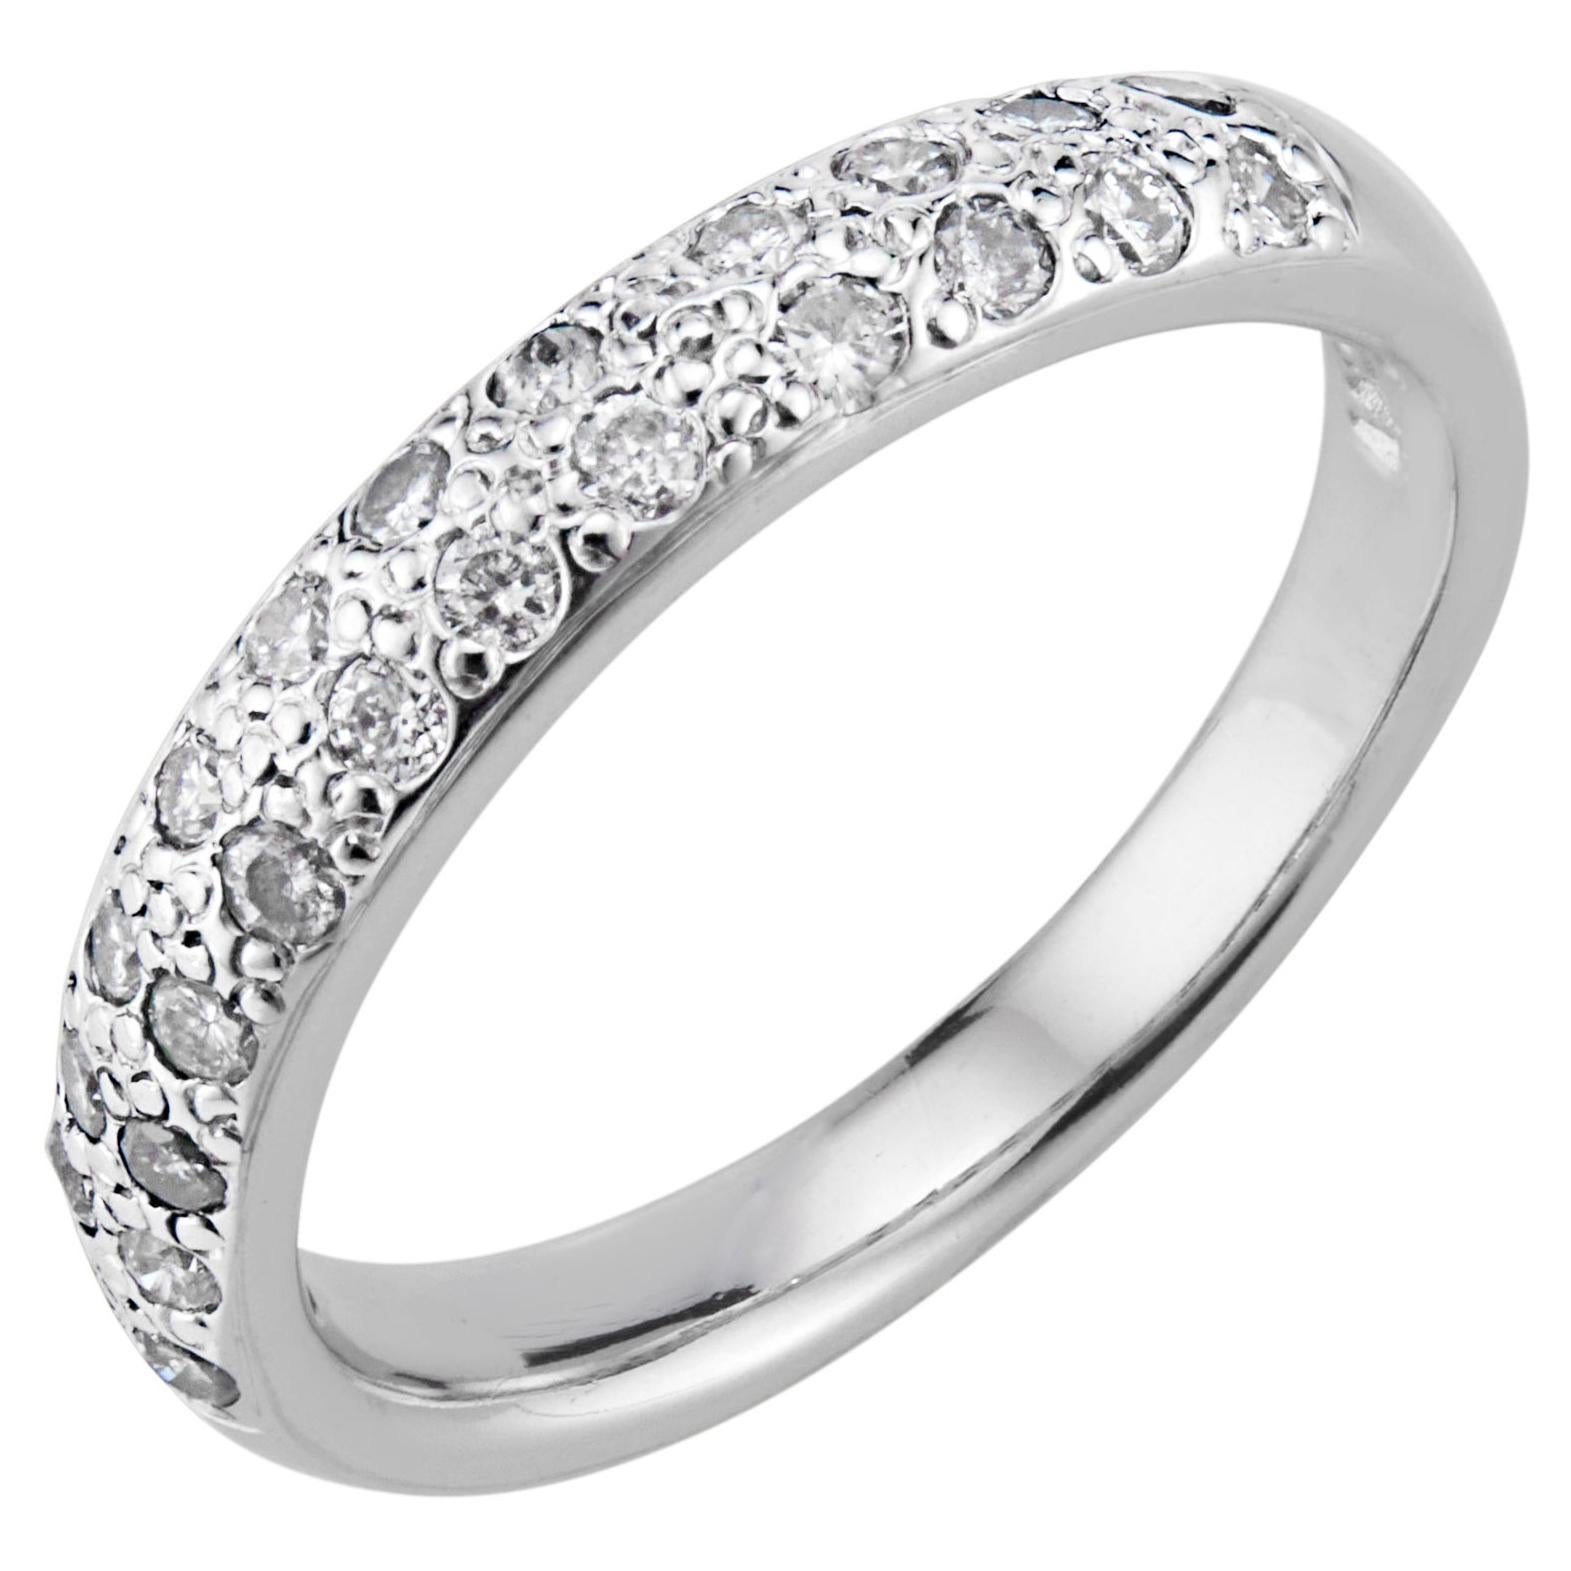 CWI .33 Carat Diamond White Gold Wedding Band Ring For Sale